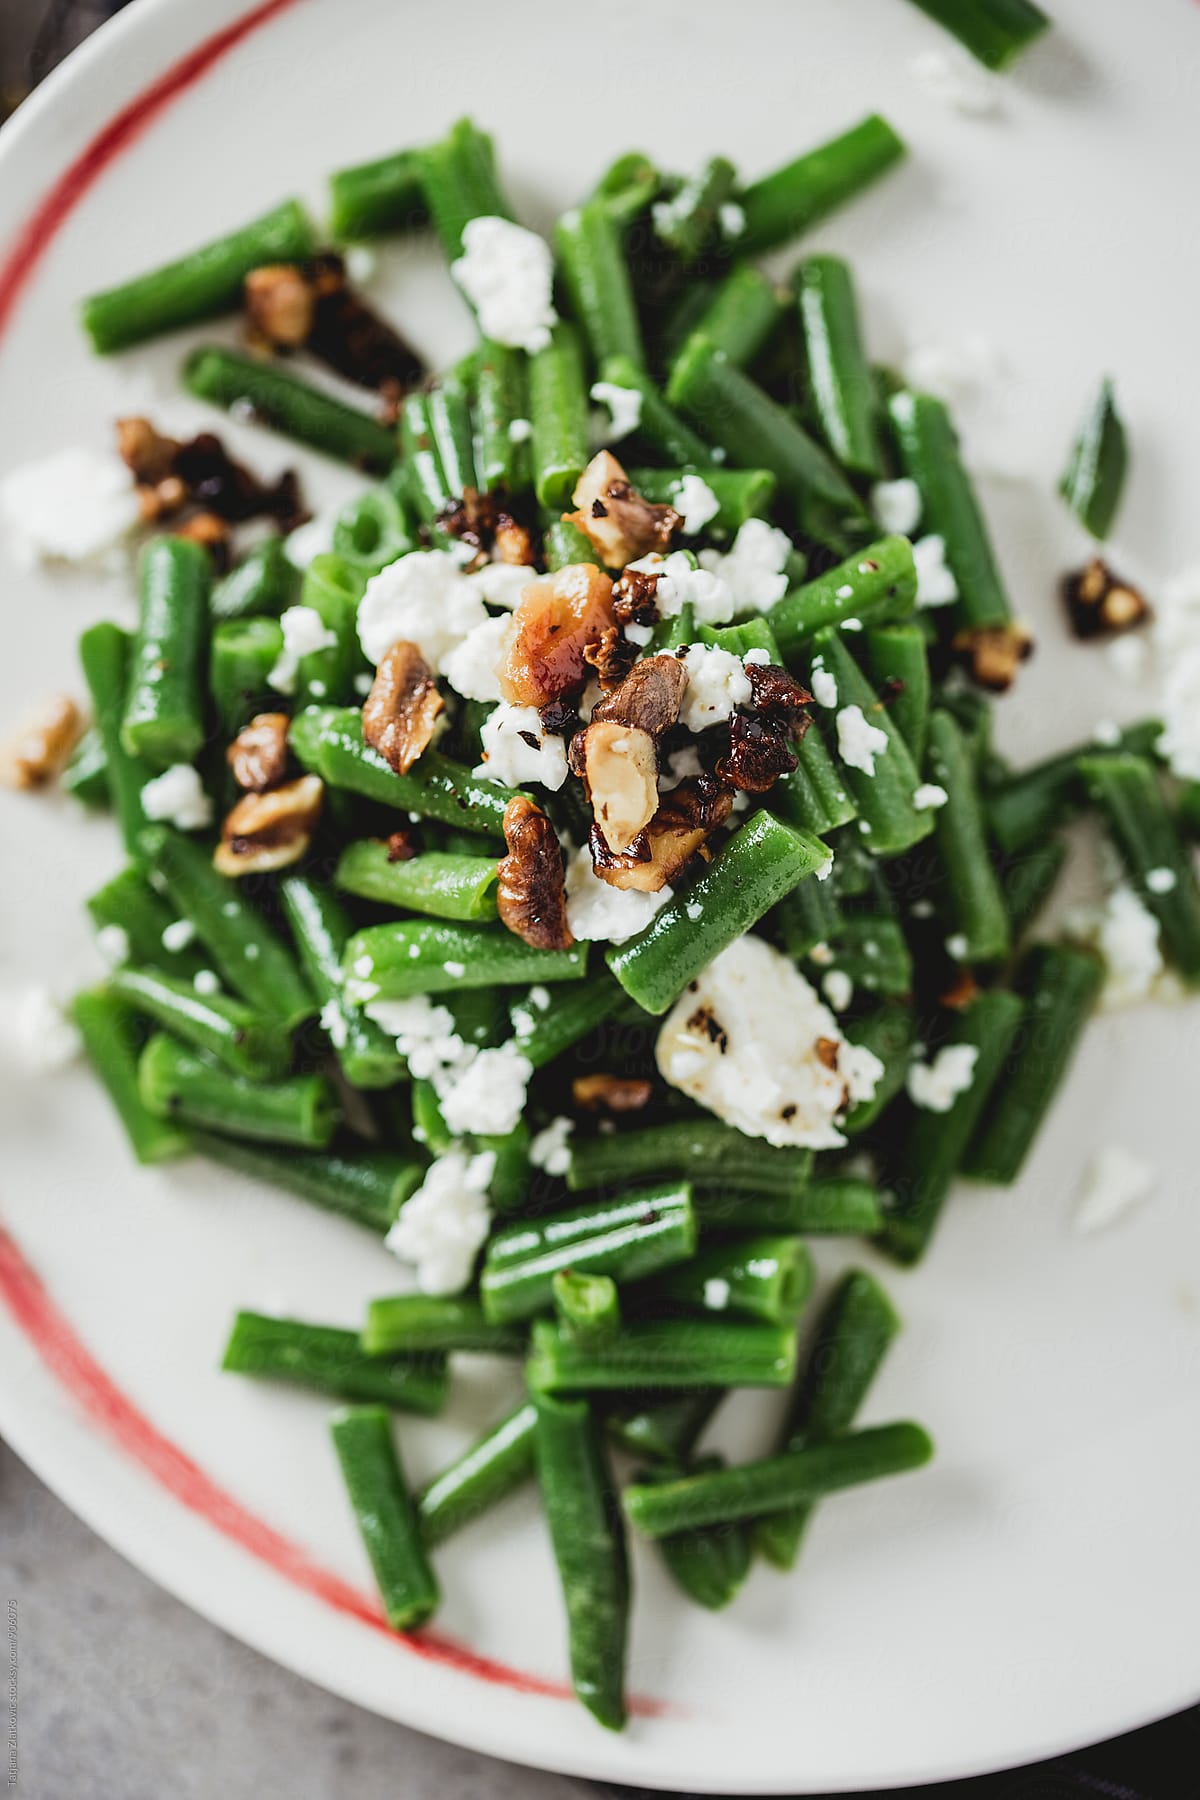 Green beans with goat cheese and walnuts